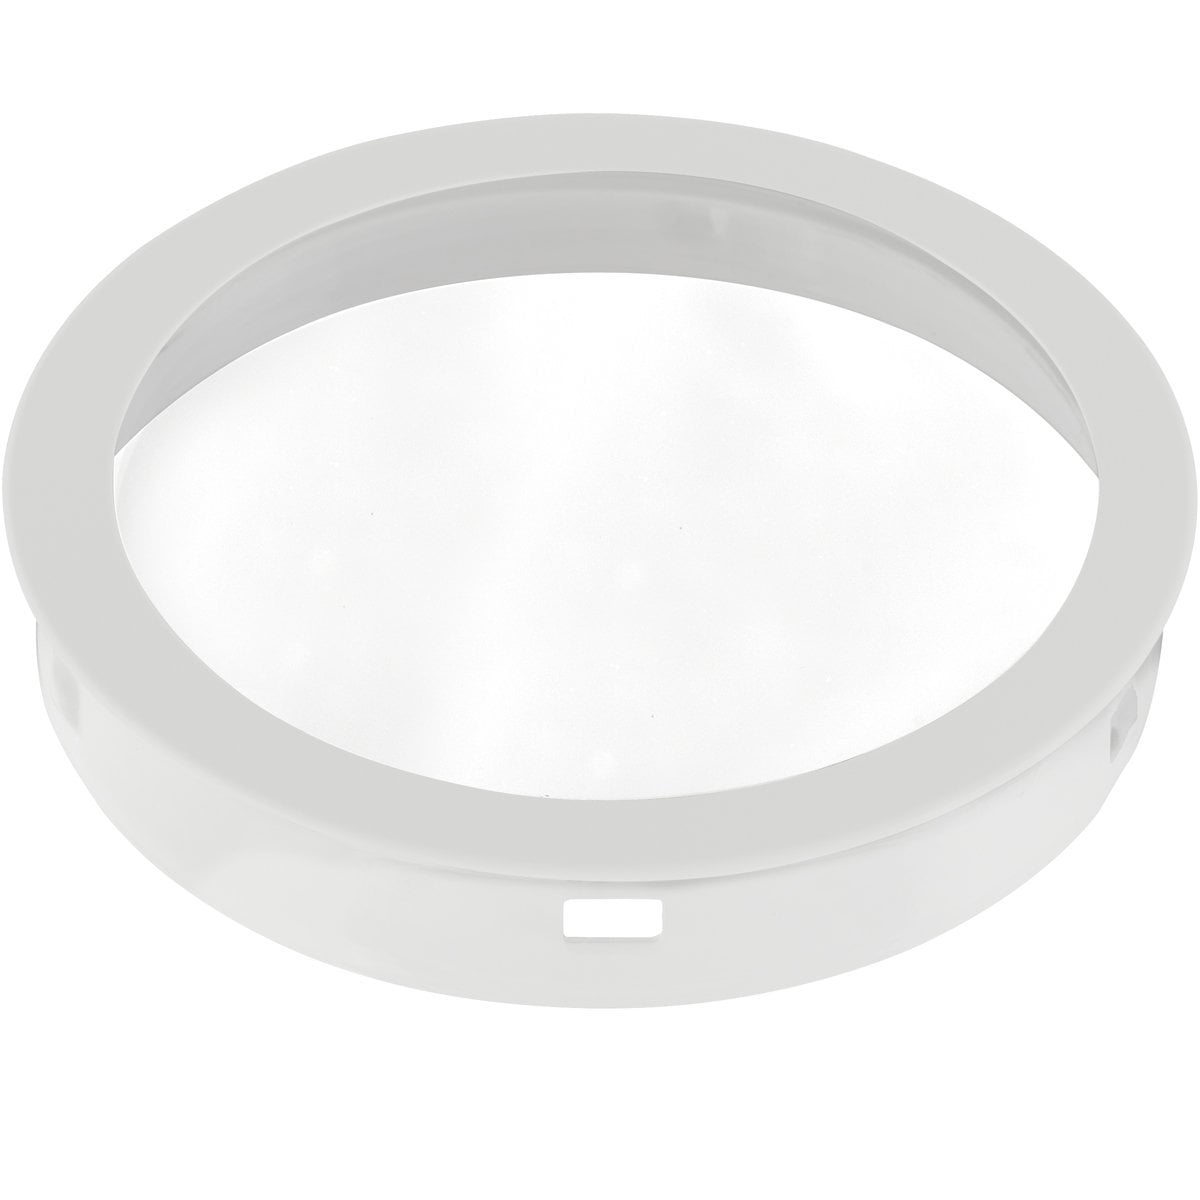 Progress Lighting P8799-30 Top Cover Lenses for P5675 Cylinder Adapts Up/Down Fixtures for Wet Location Use Heat and Shatter-Resistant Clear Tempered Lens with Black Trim White 